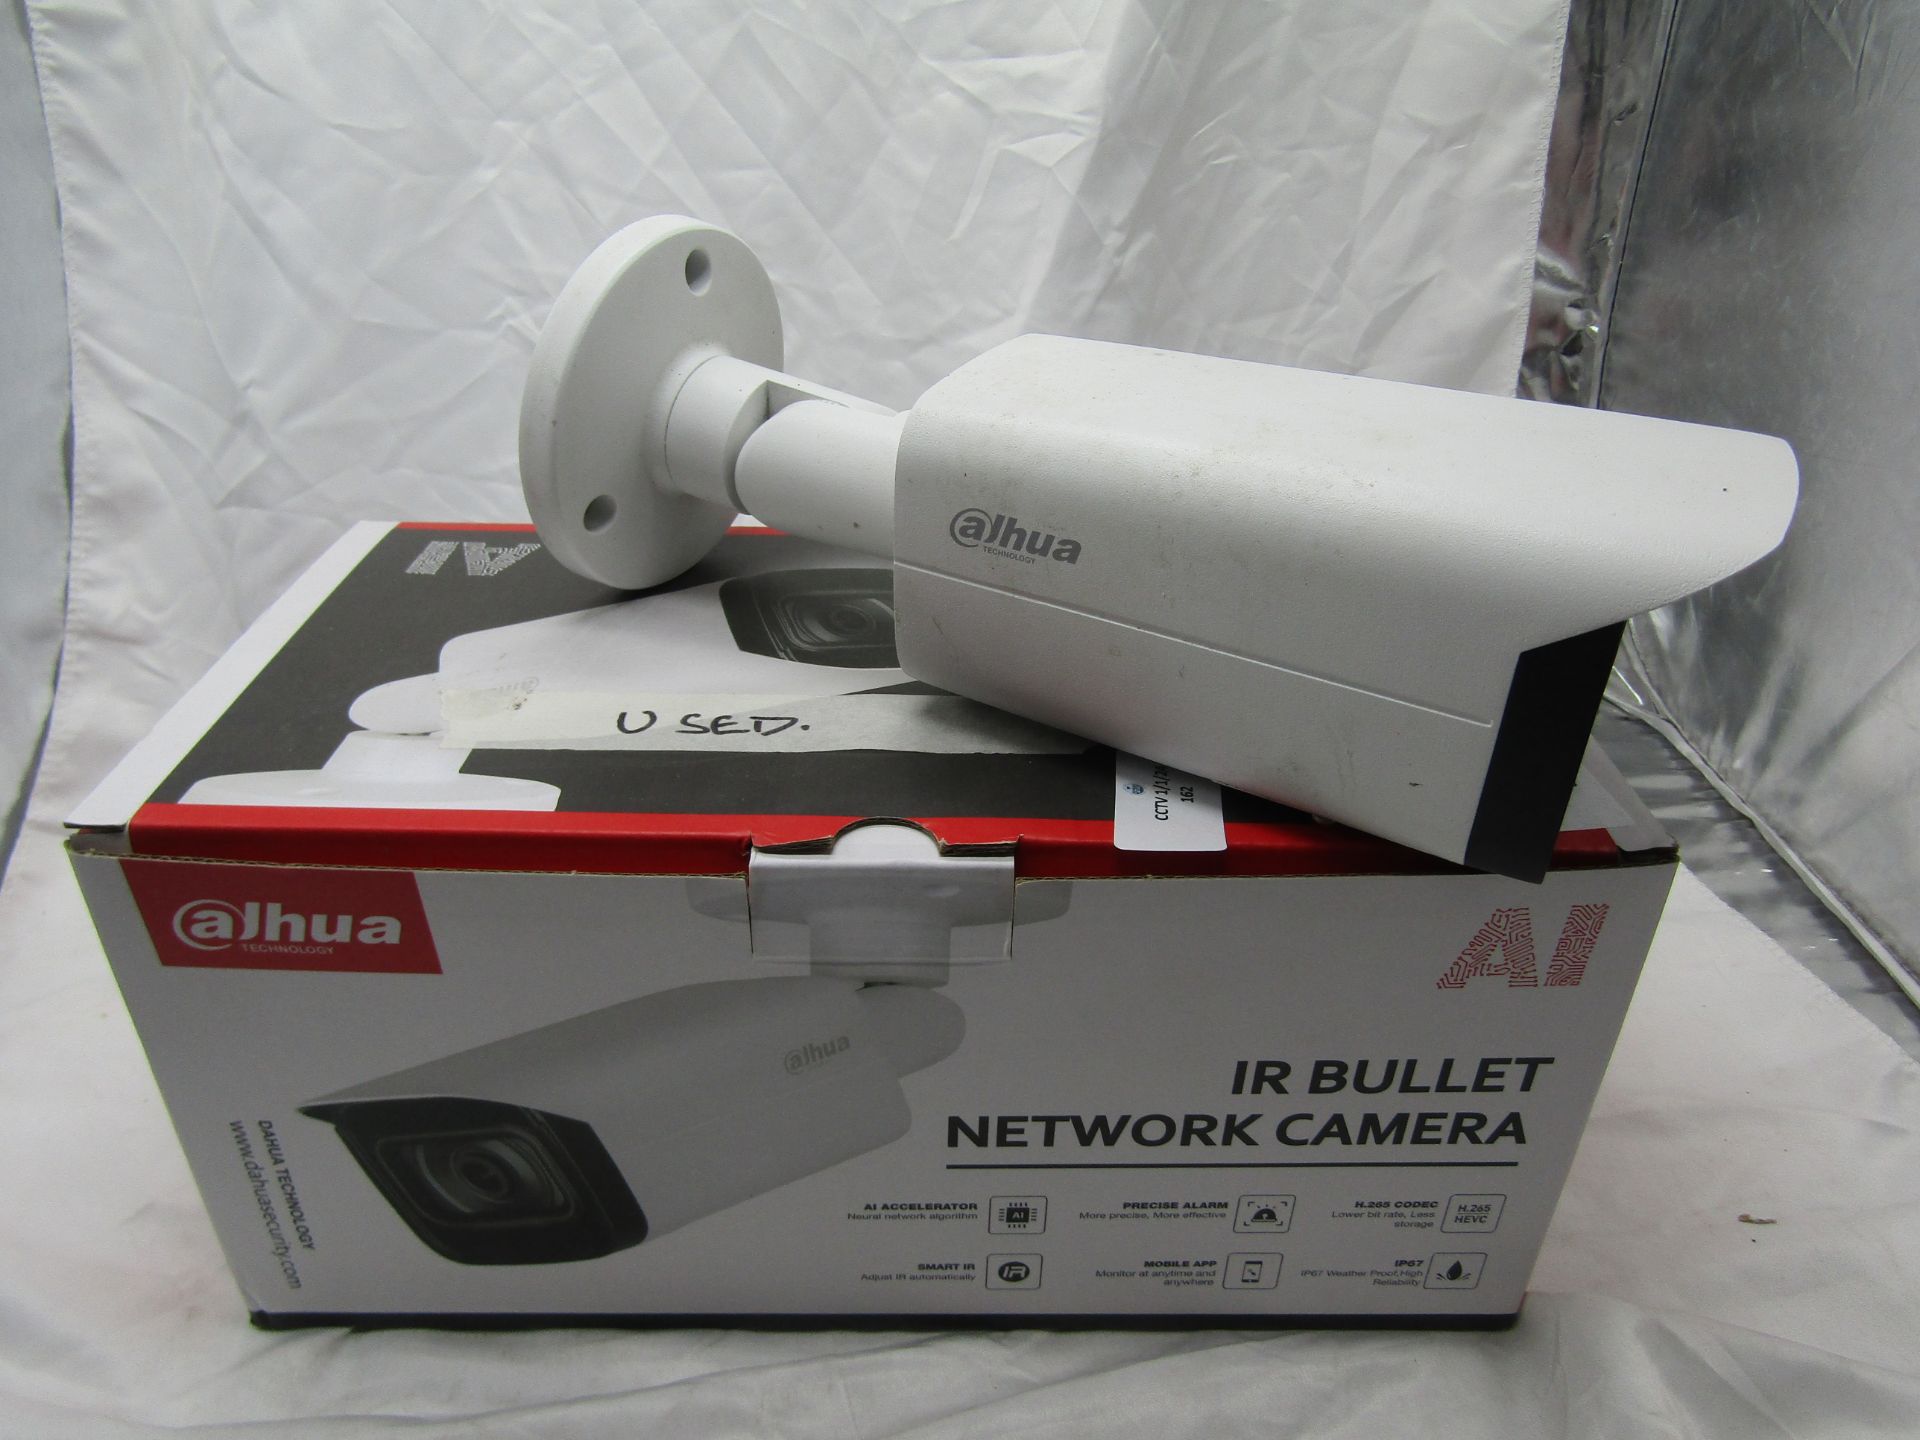 one lot of over 200 items of CCTV and Surveillance equipment, includes DVRs, Cameras, Thermal - Image 75 of 104